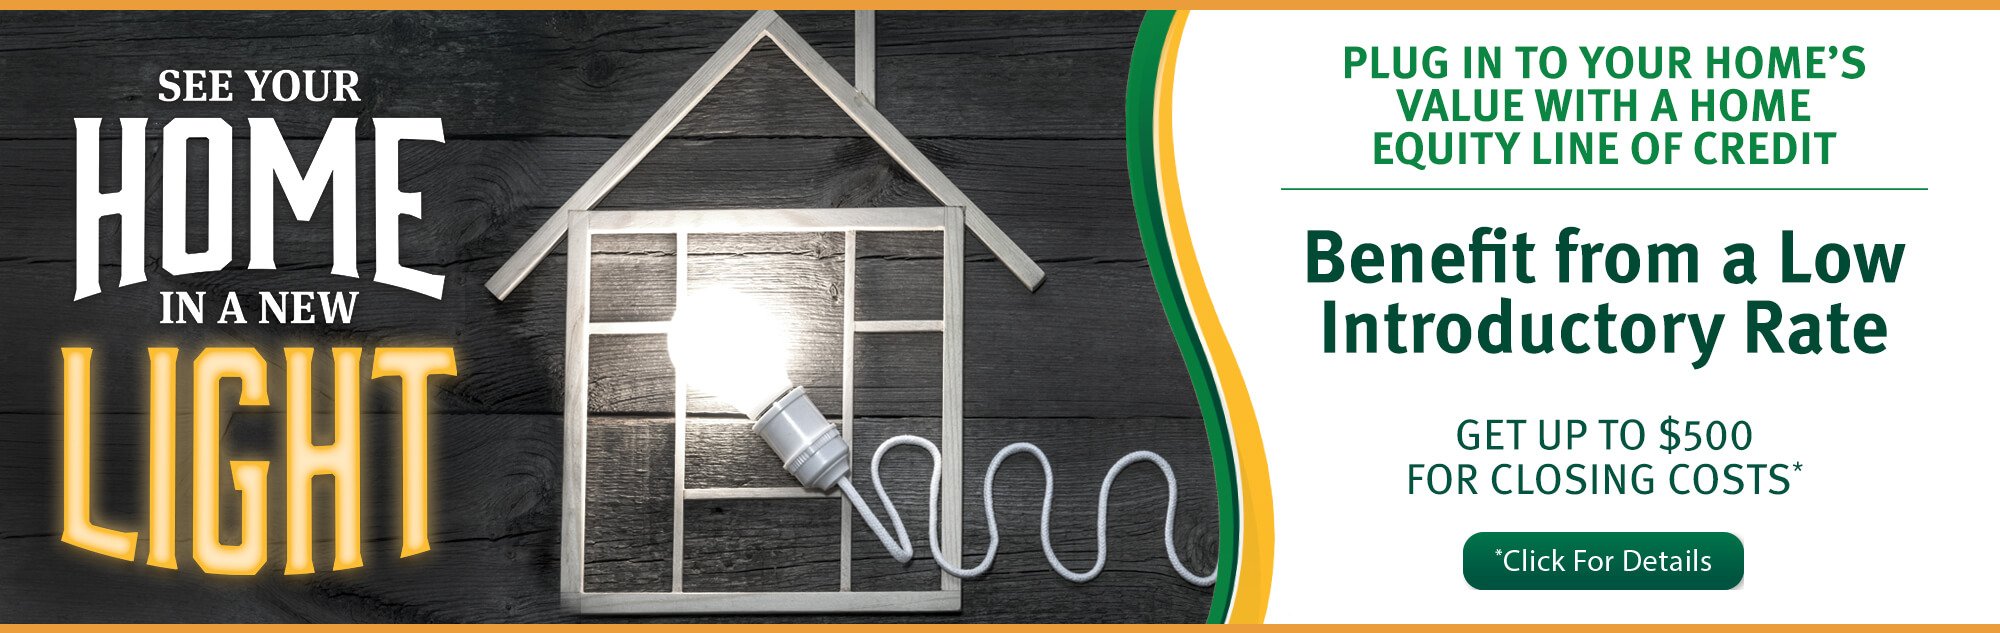 See Your Home in a new light - Plug in to your home's value with a home equity line of credit. Benefit from a low introductory rate. Get up to $500 for closing costs*. Click for Details